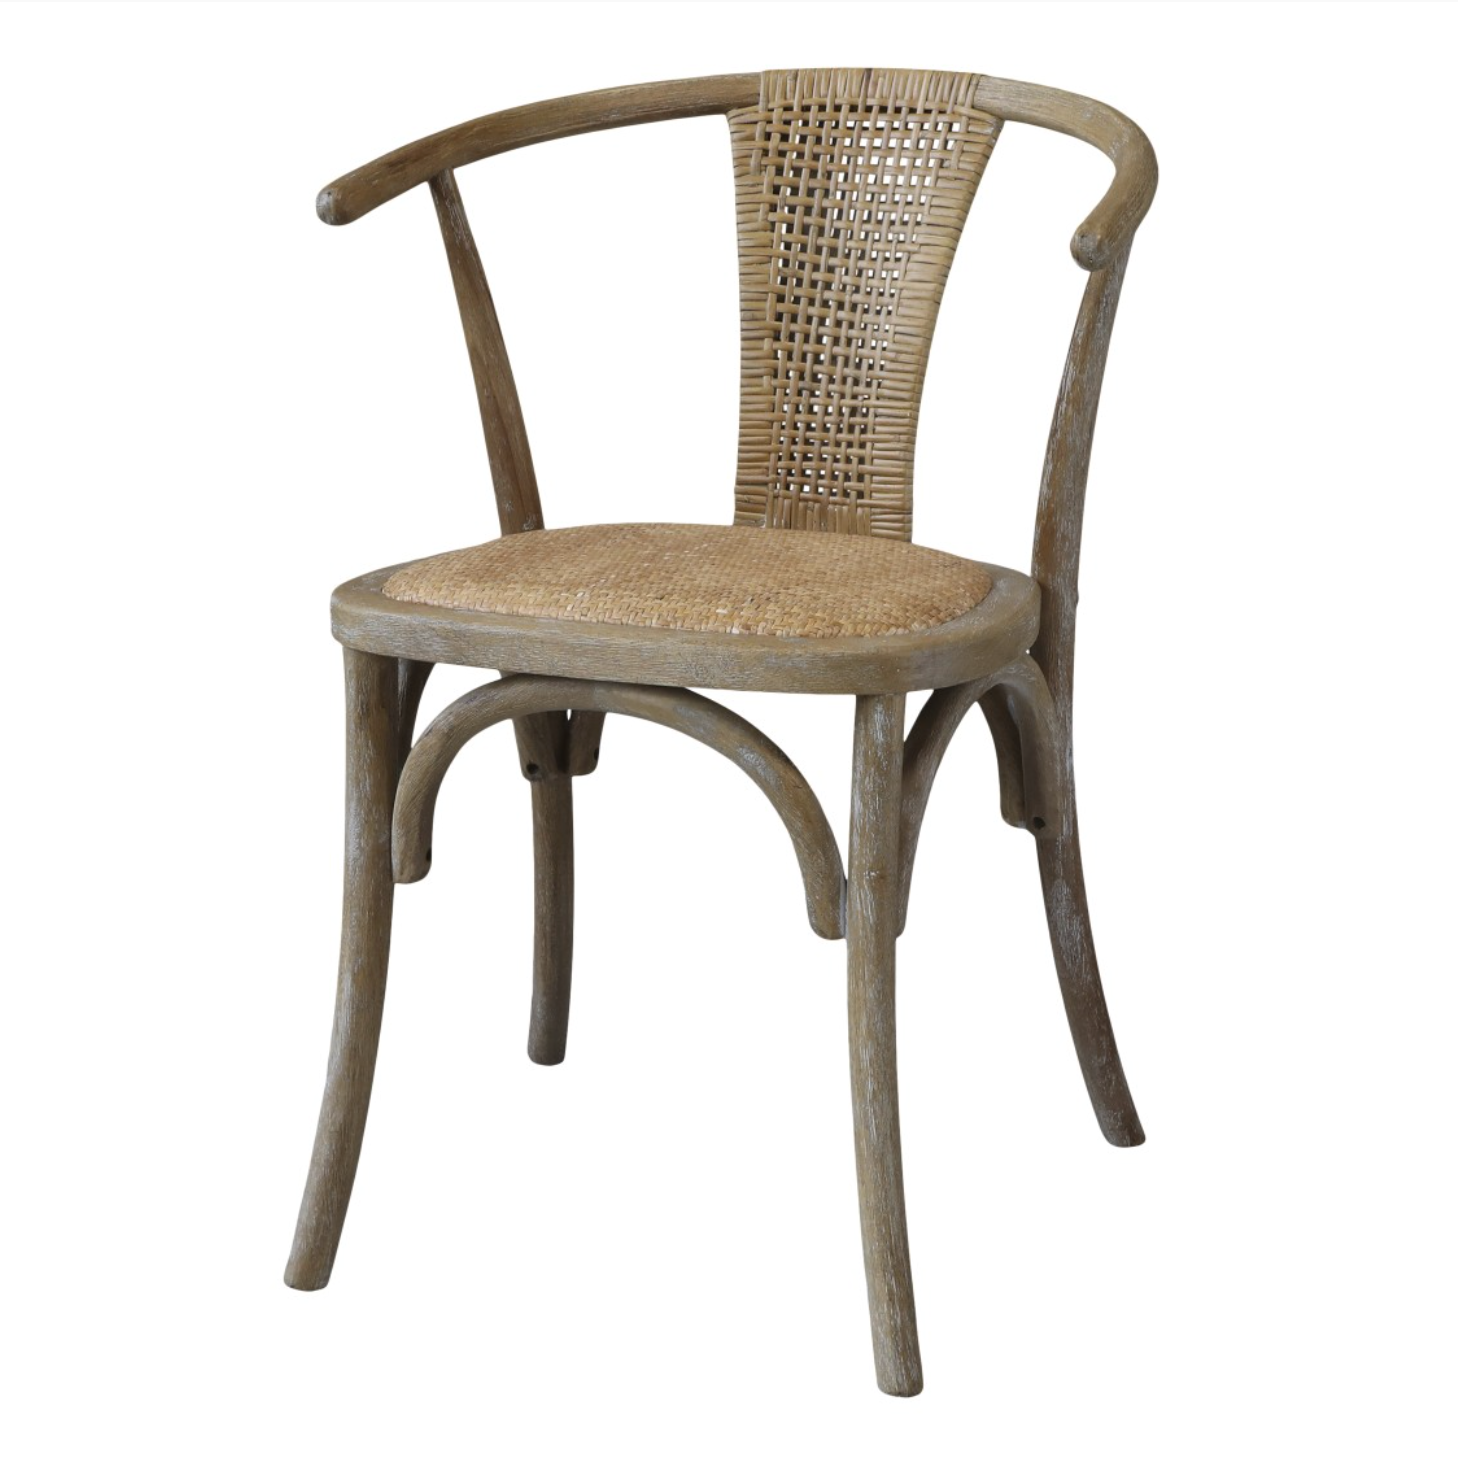  Wicker Dining Chairs.